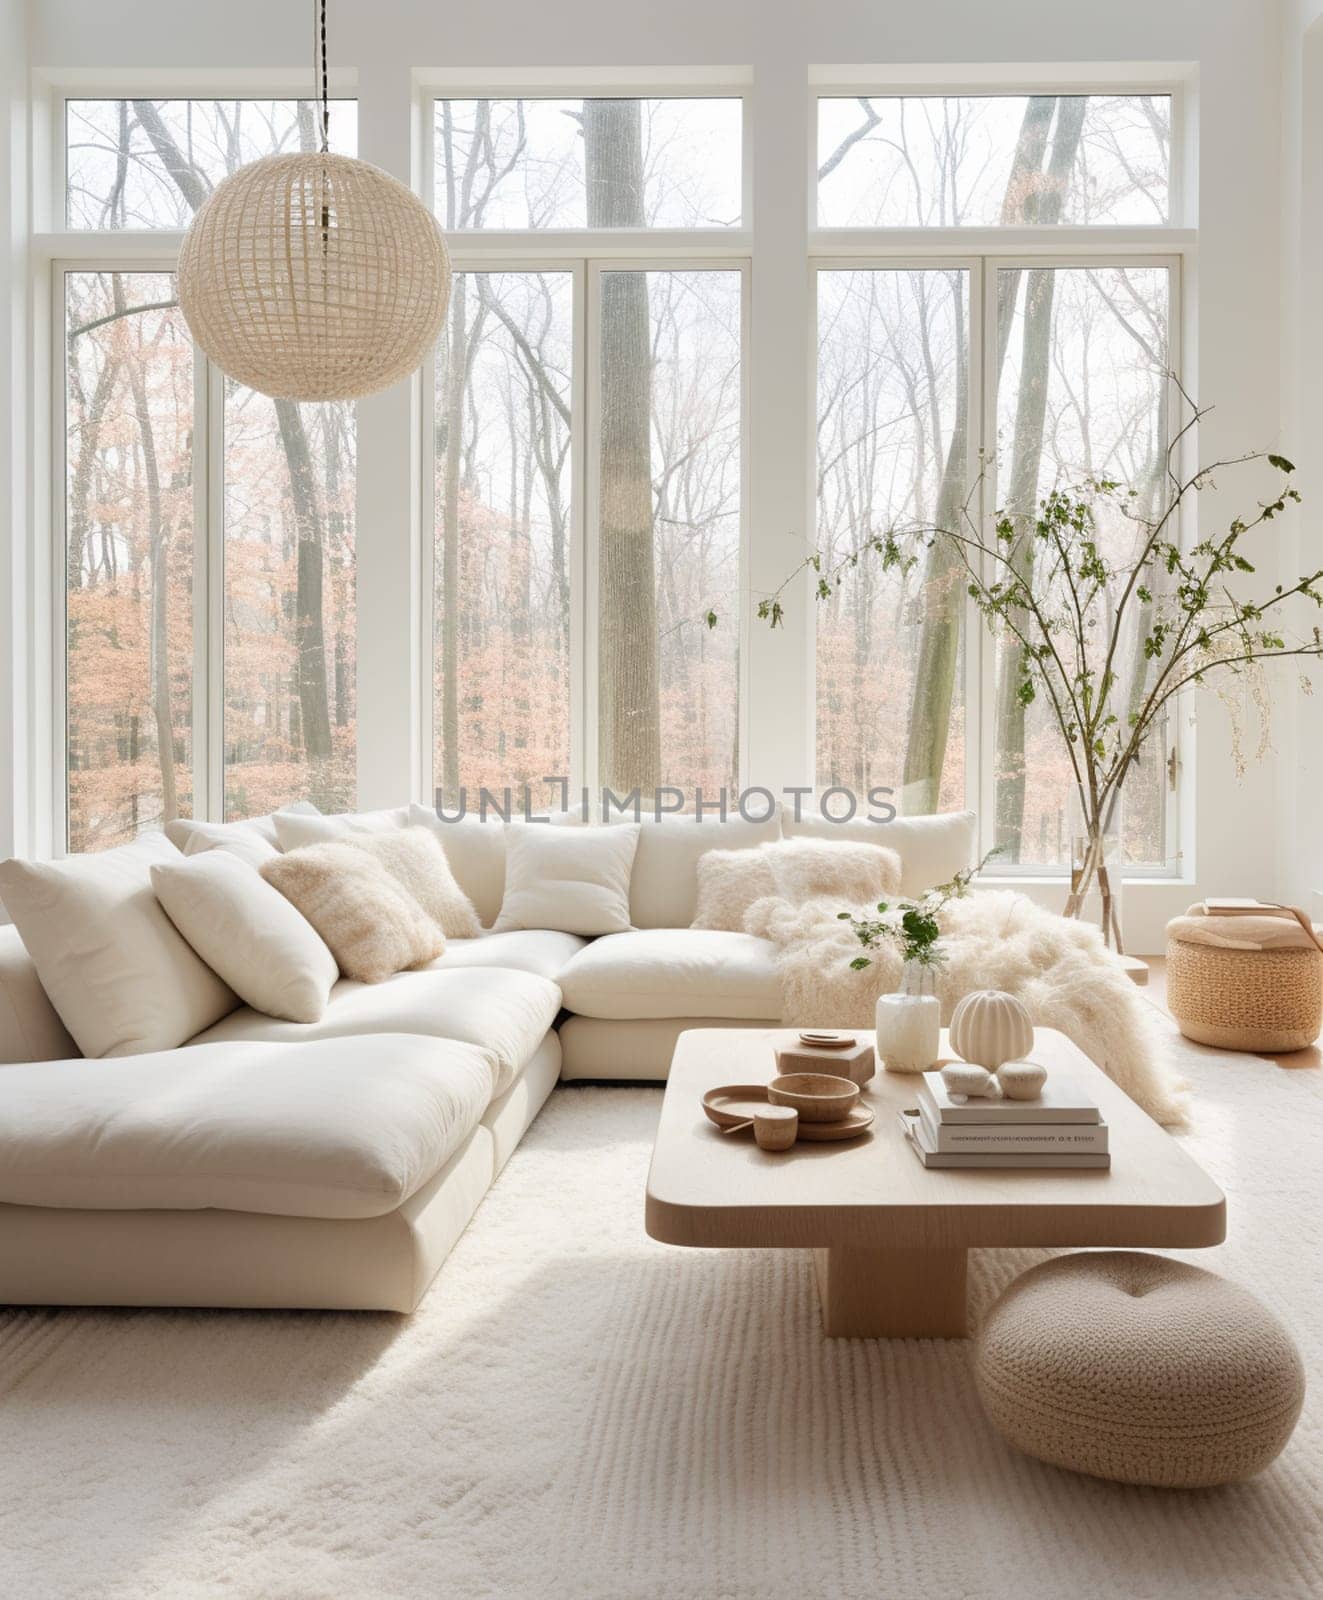 Contemporary living room with large window overlooking the backyard. 3D rendering by Andelov13